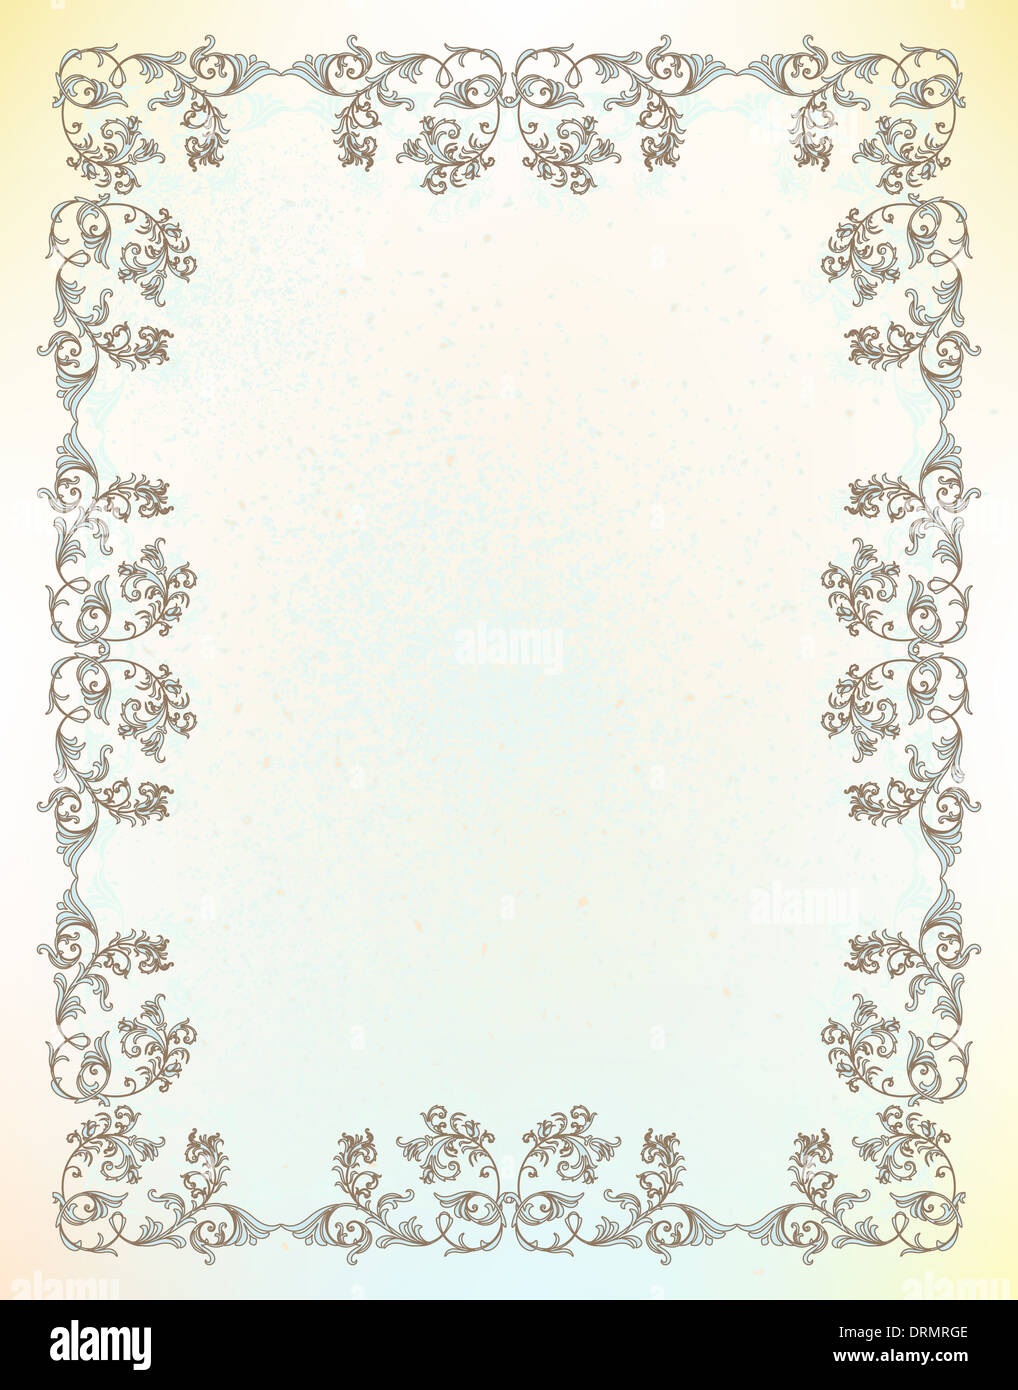 floral frame Stock Photo